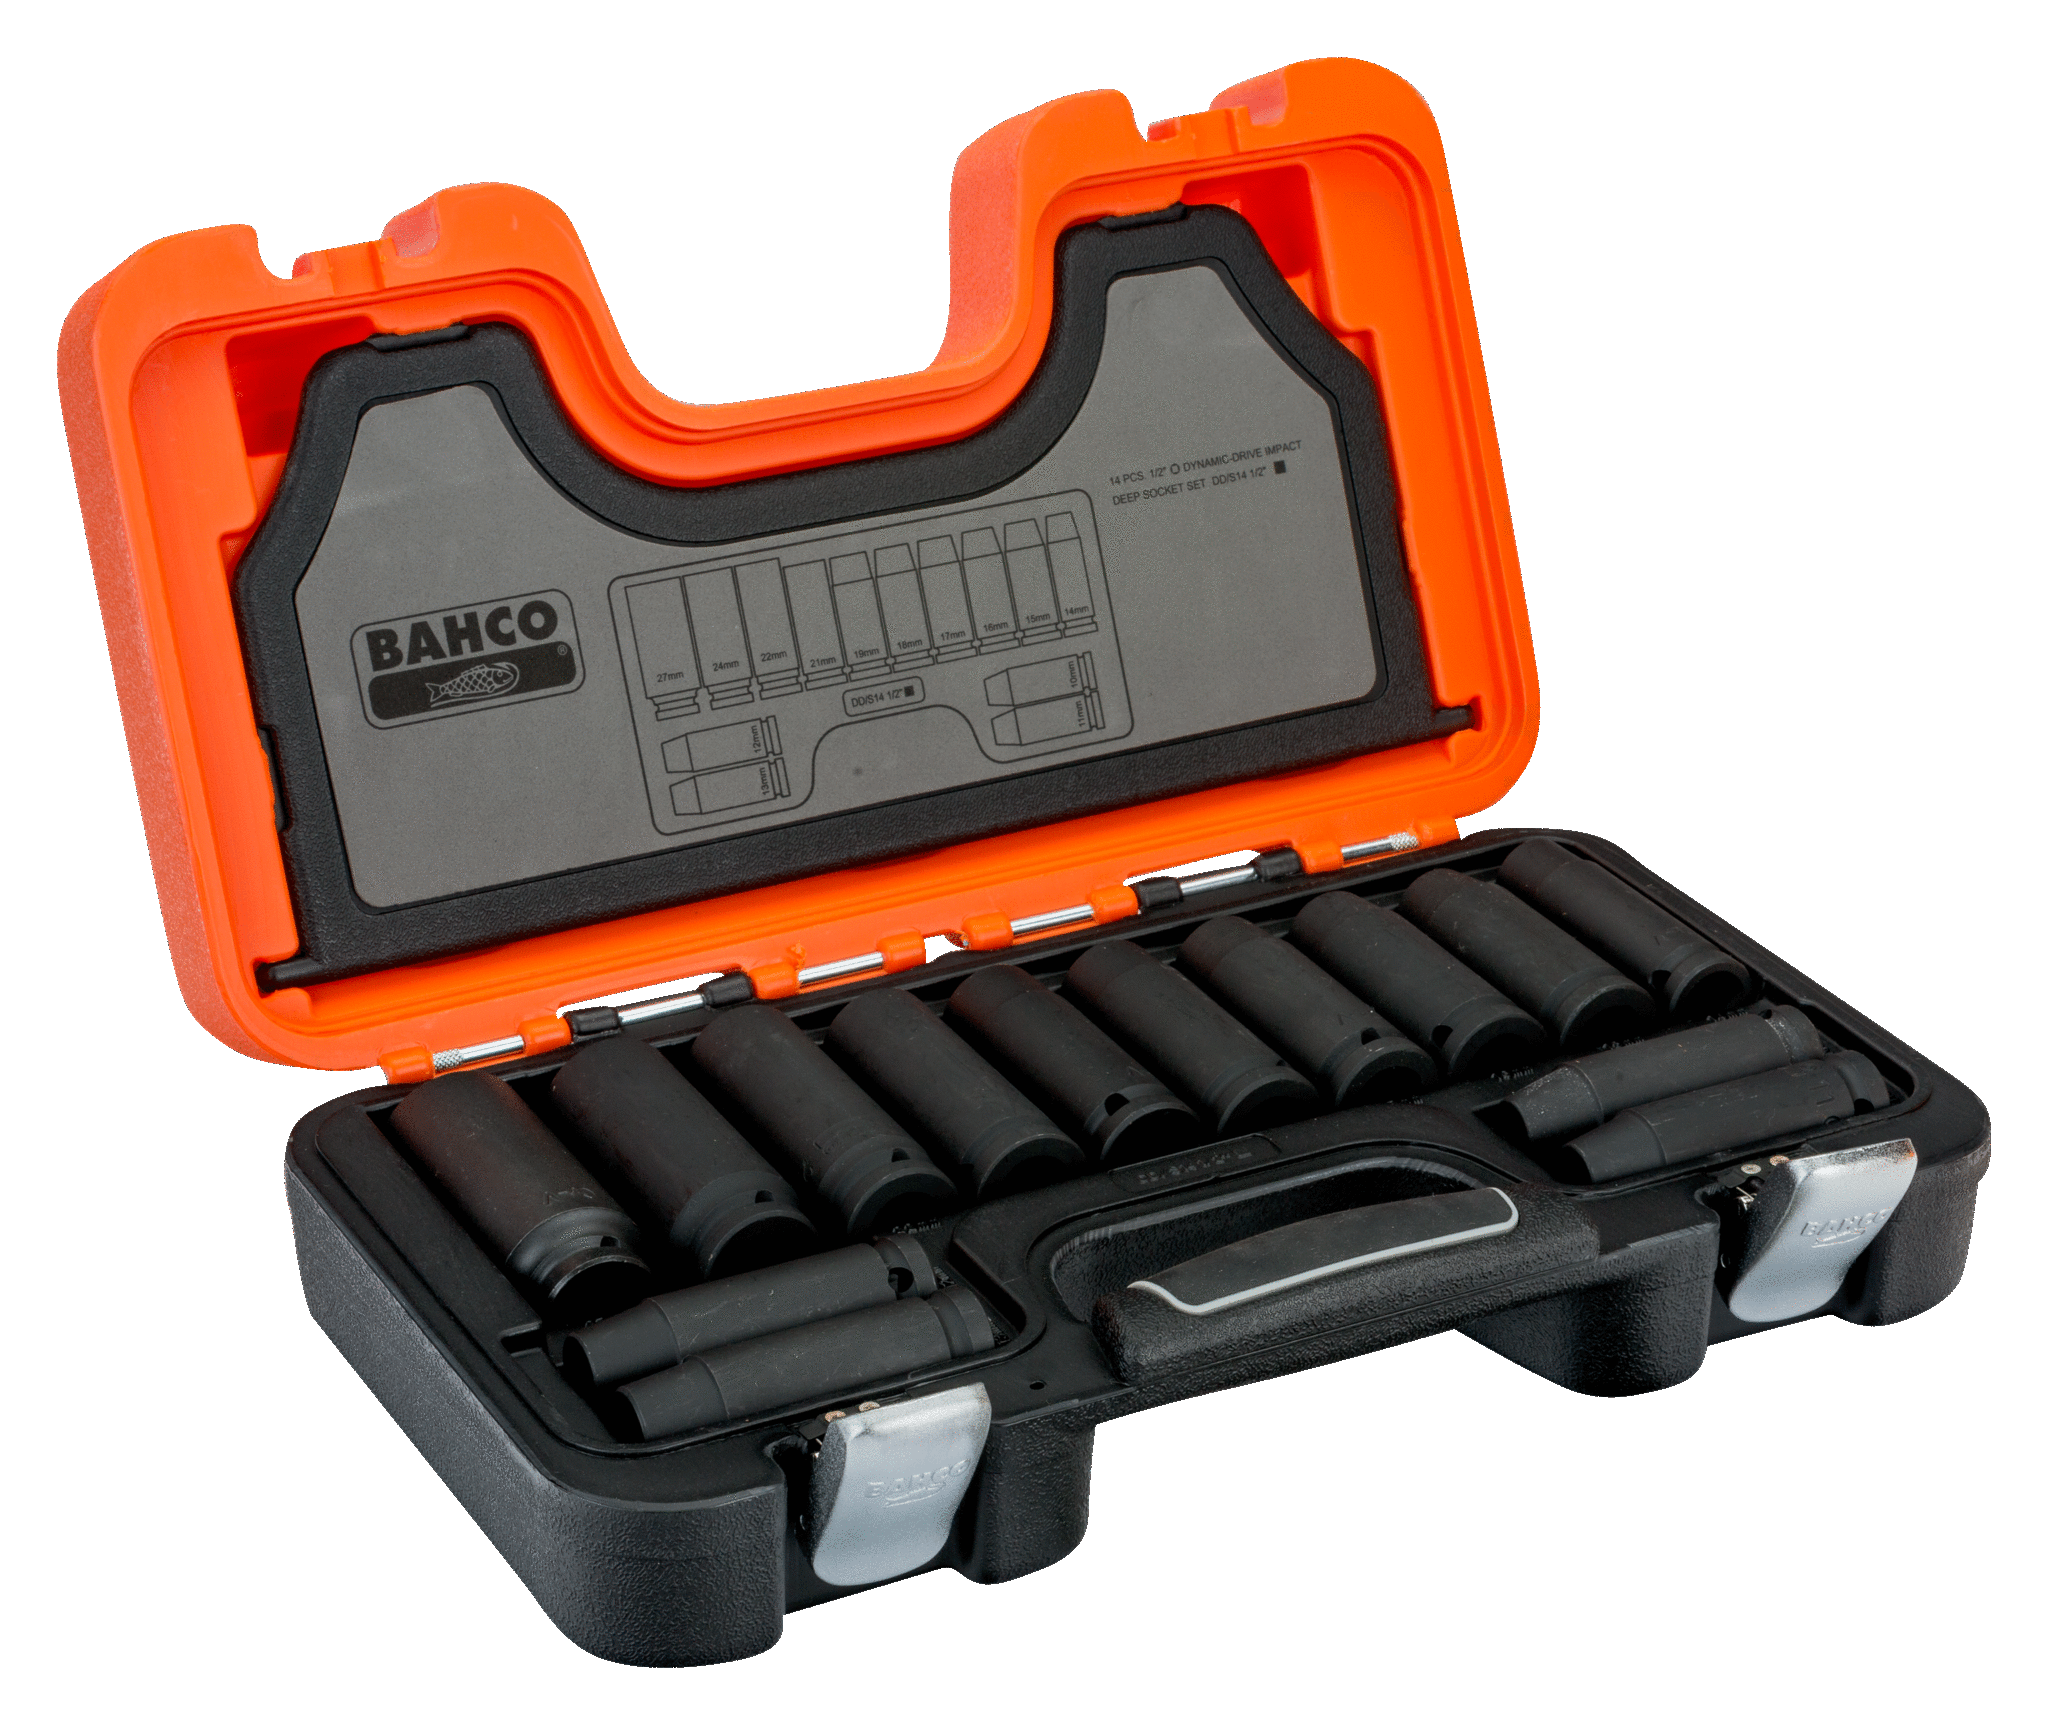 14Pce 1/2" Square Drive Deep Impact Socket Set with Metric Hex Profile and Phosphate Finish D-DD/S14 by Bahco